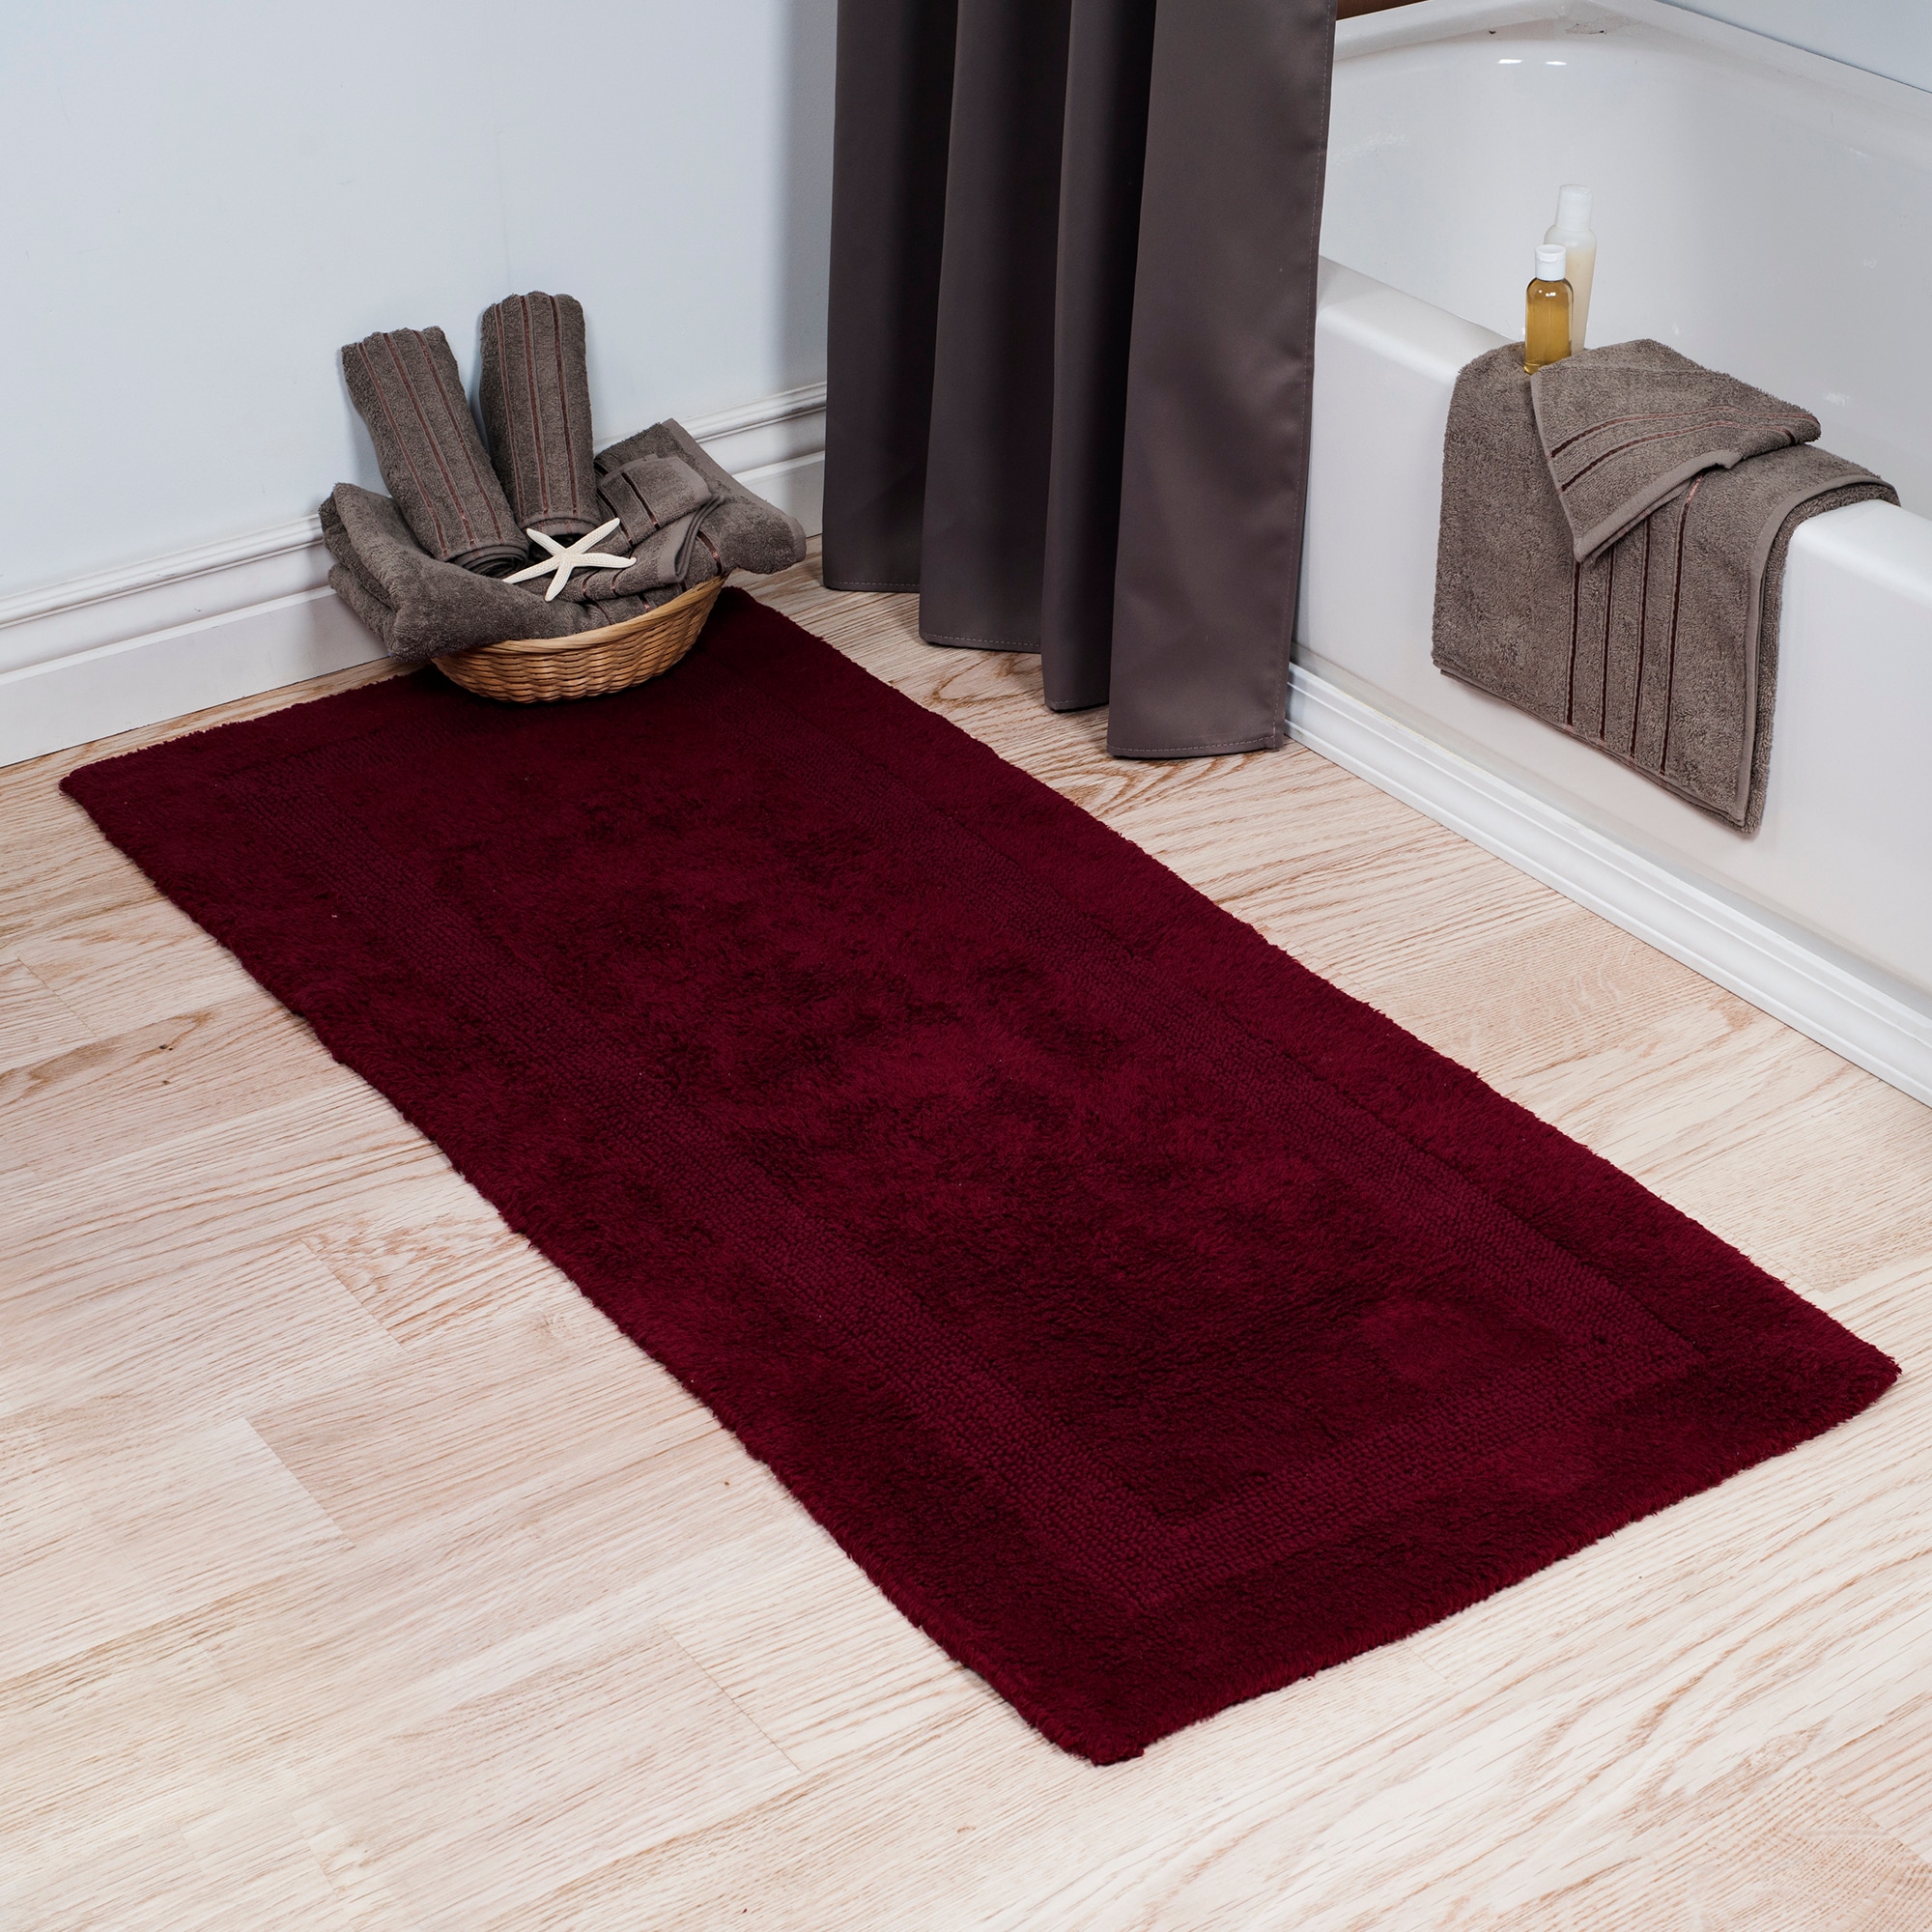 Hastings Home Bathroom Mats 60-in x 24-in Burgundy Polyester